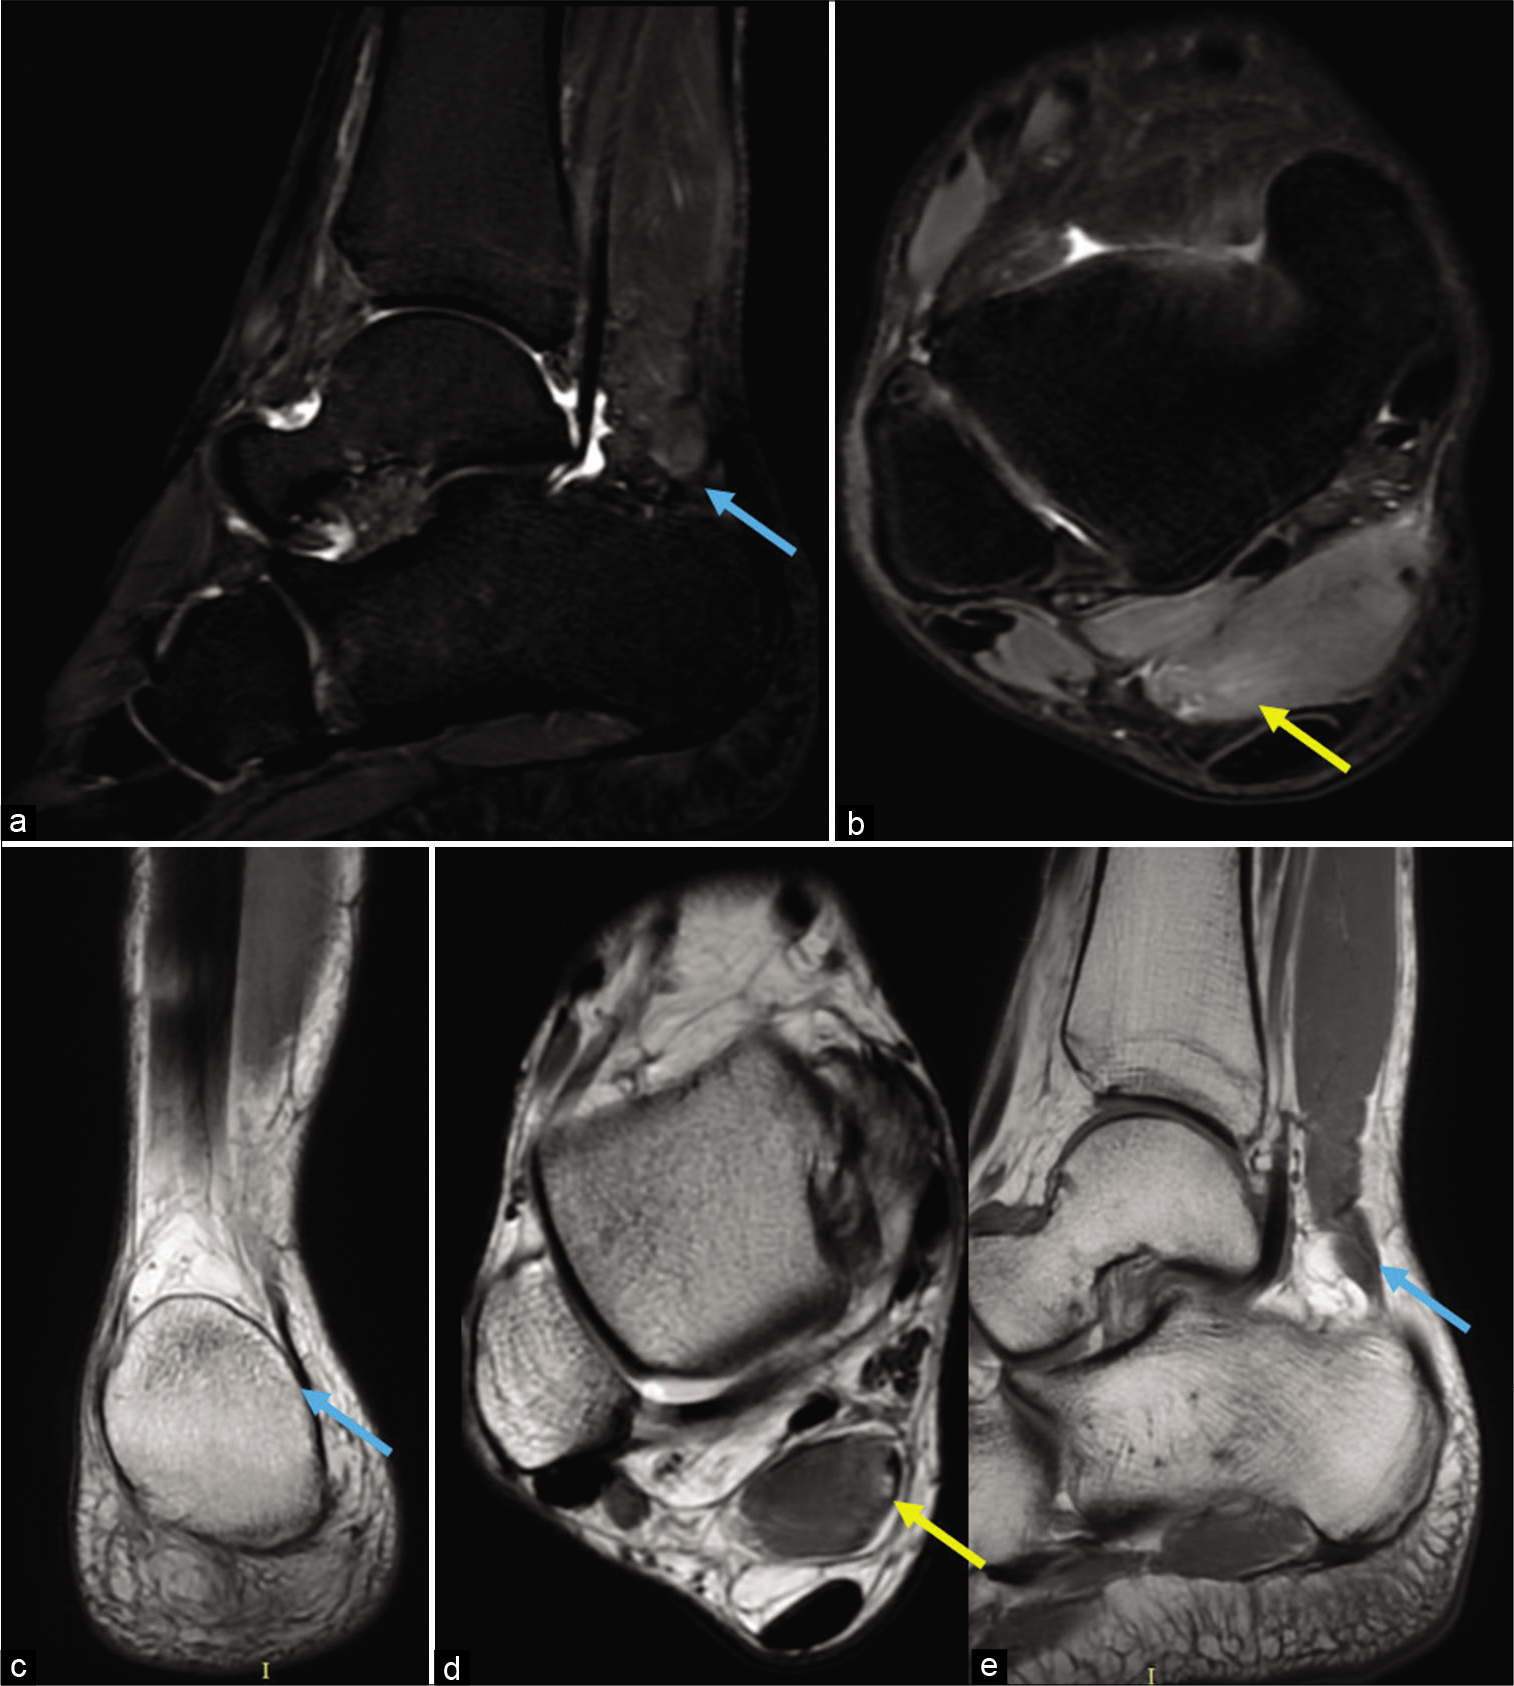 Sagittal Short time to inversion recovery (STIR) (a), Axial proton density fat-suppressed (PDFS) images (b), Coronal PD (c), Axial PD (d) and Sagittal T1 weighted MRI images (e). An abnormal structure isointense to muscle anterior to Achilles tendon is seen inserting along the medial aspect of the calcaneum (a,c,e) (blue arrows). Axial PDFS and PD non fat suppressed images (b and d) reveal focal intrafascicular edema in the form of hyperintensity along the inferior aspect of the muscle with focal discontinuity along the myotendinous junction (yellow arrows). Posterior tibial nerve appears normal.